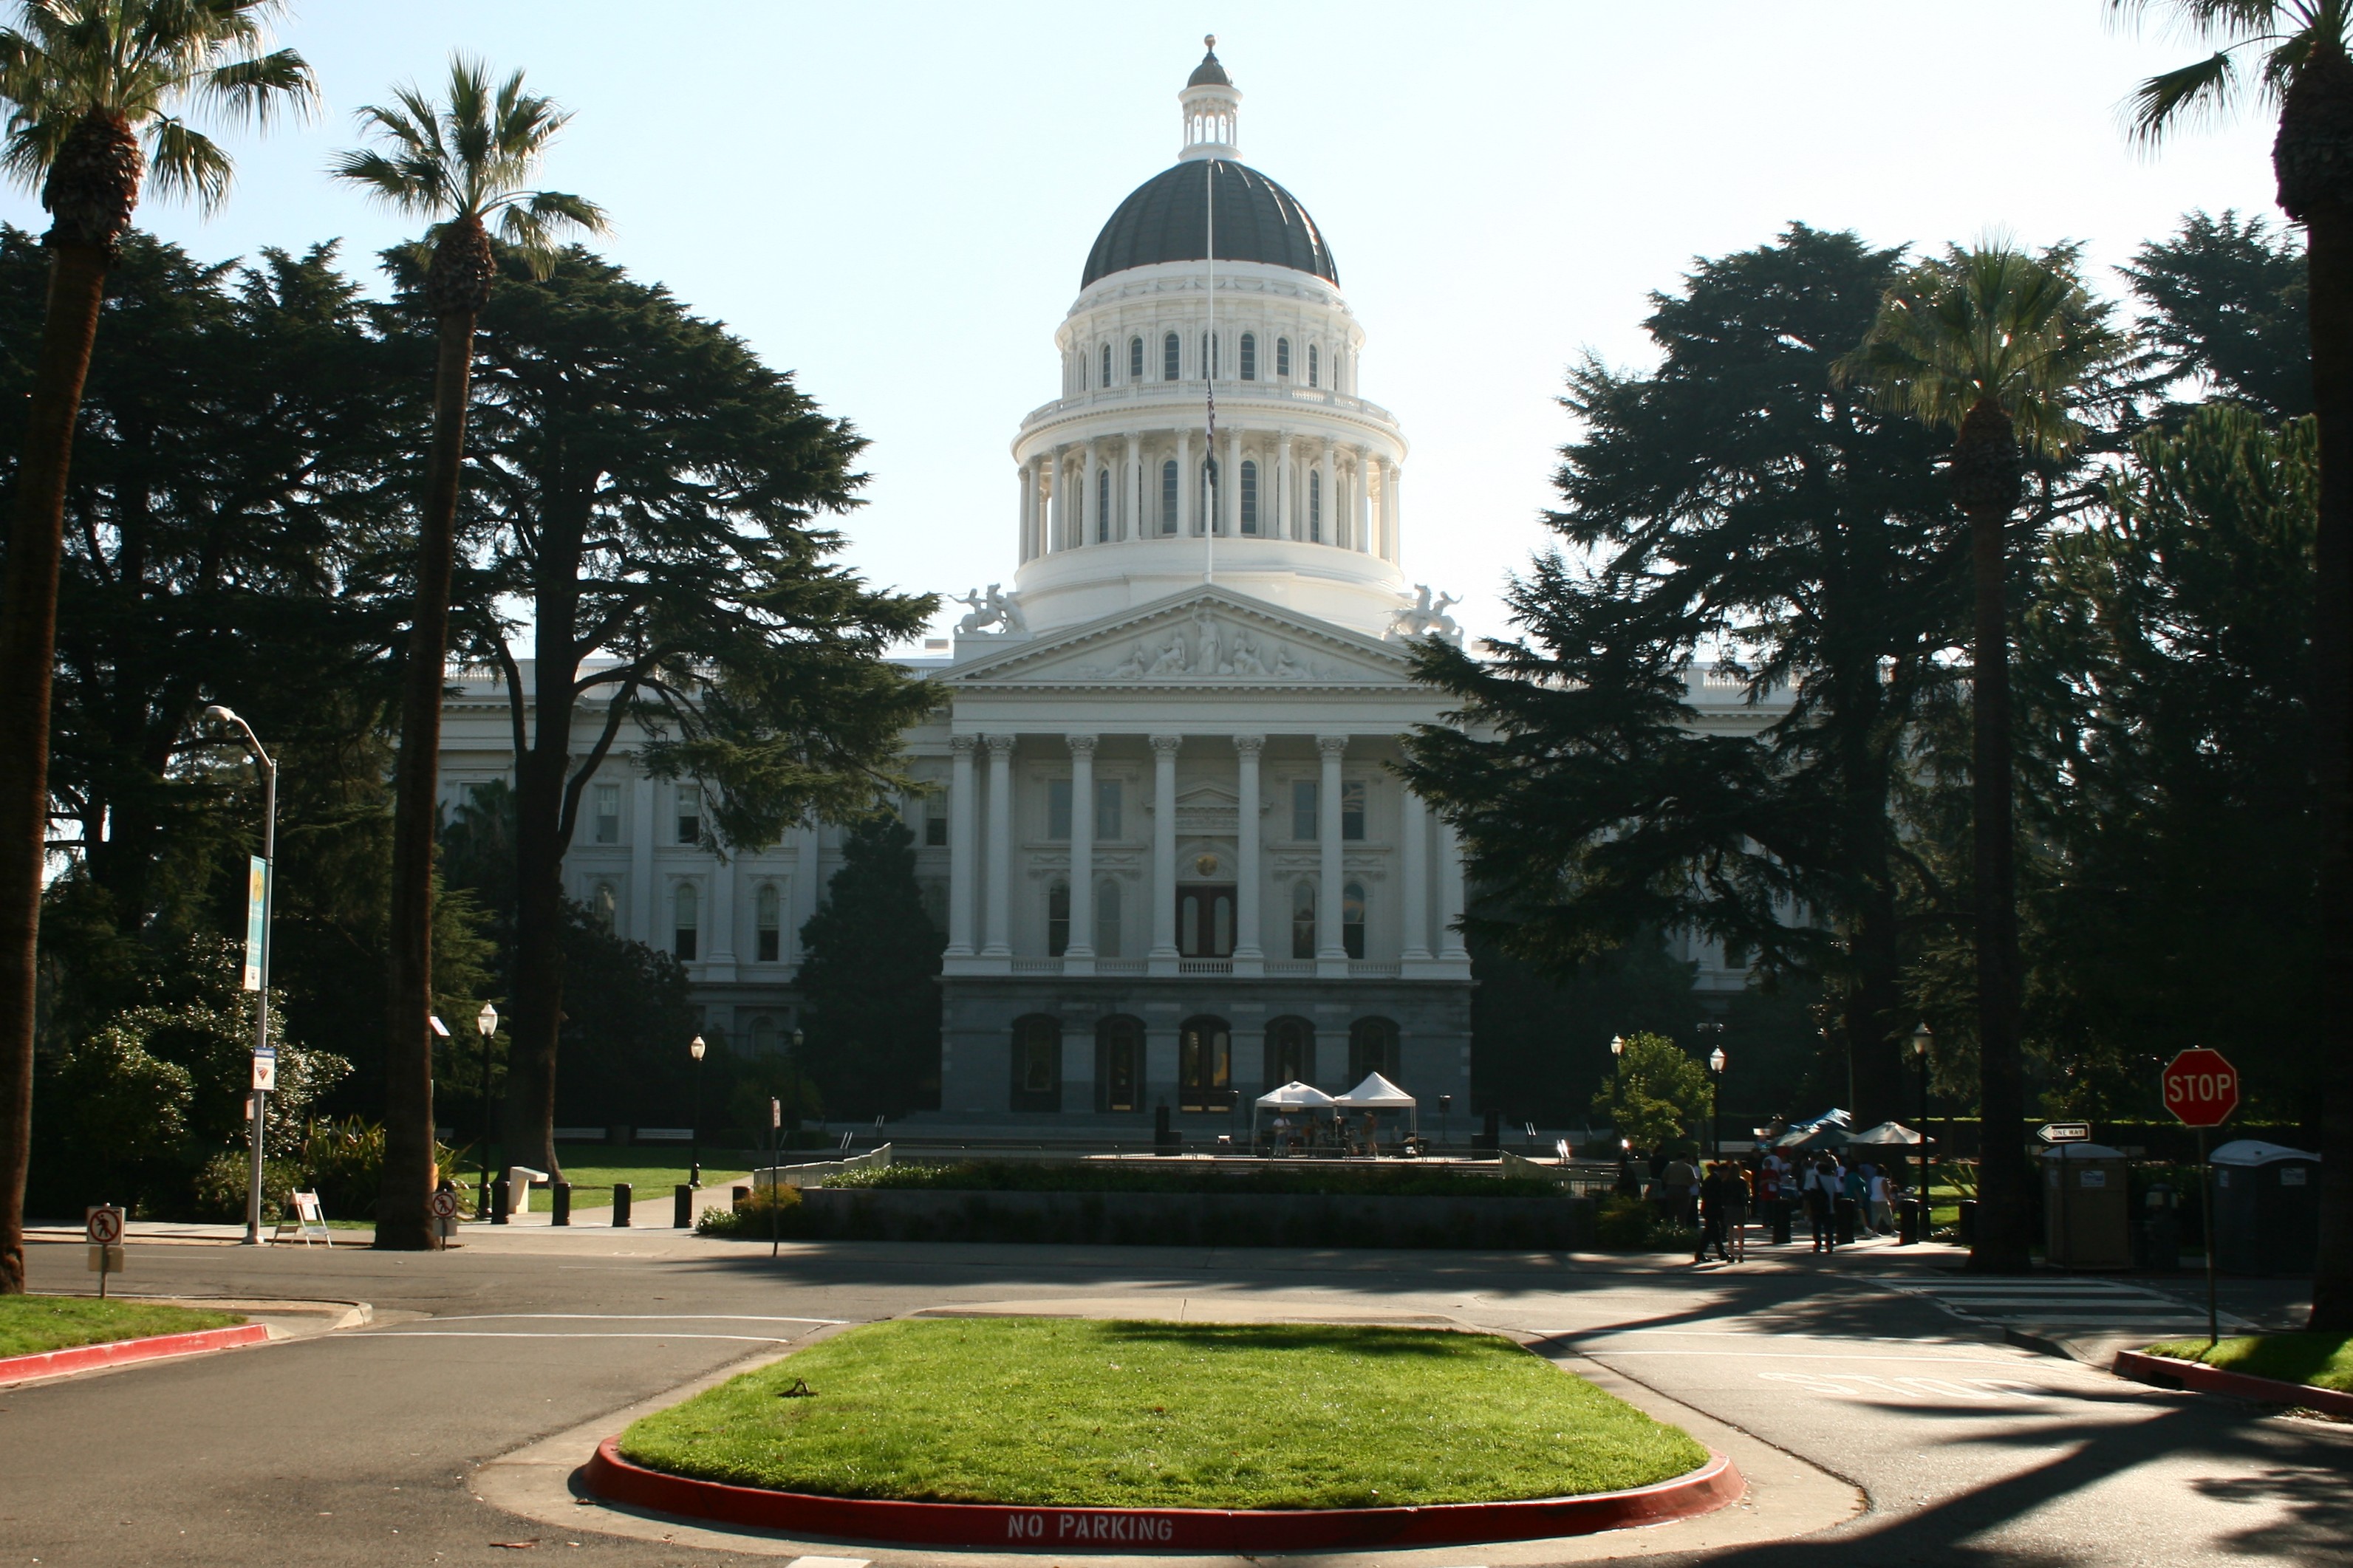 A view of the California State Capitol building. Photo credit: prayitno via Flickr